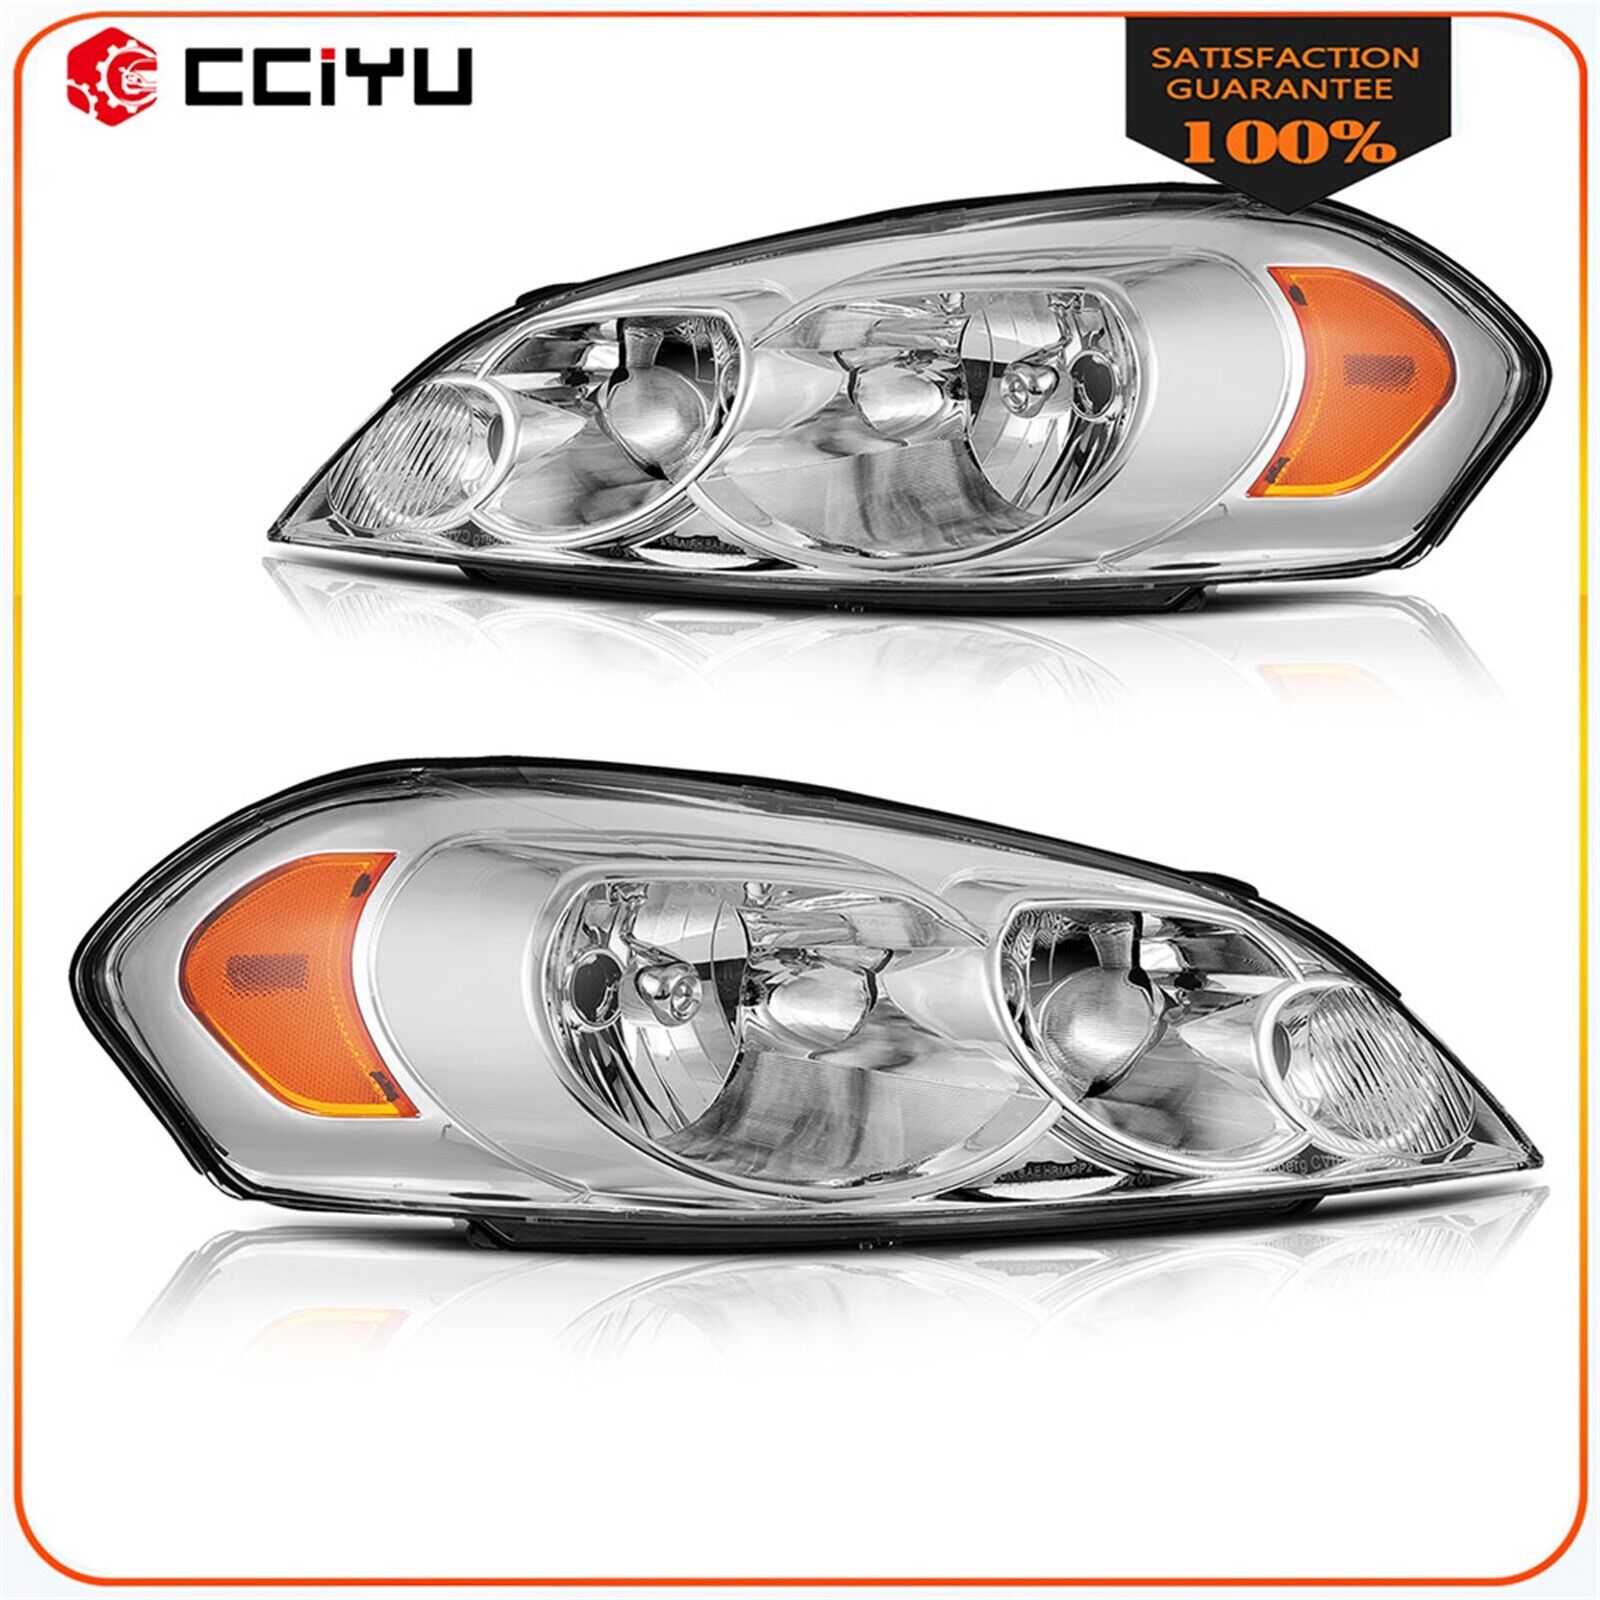 Chrome Amber For 2006-2013 Chevy Impala 06-07Monte Carlo Pair Headlight Assembly